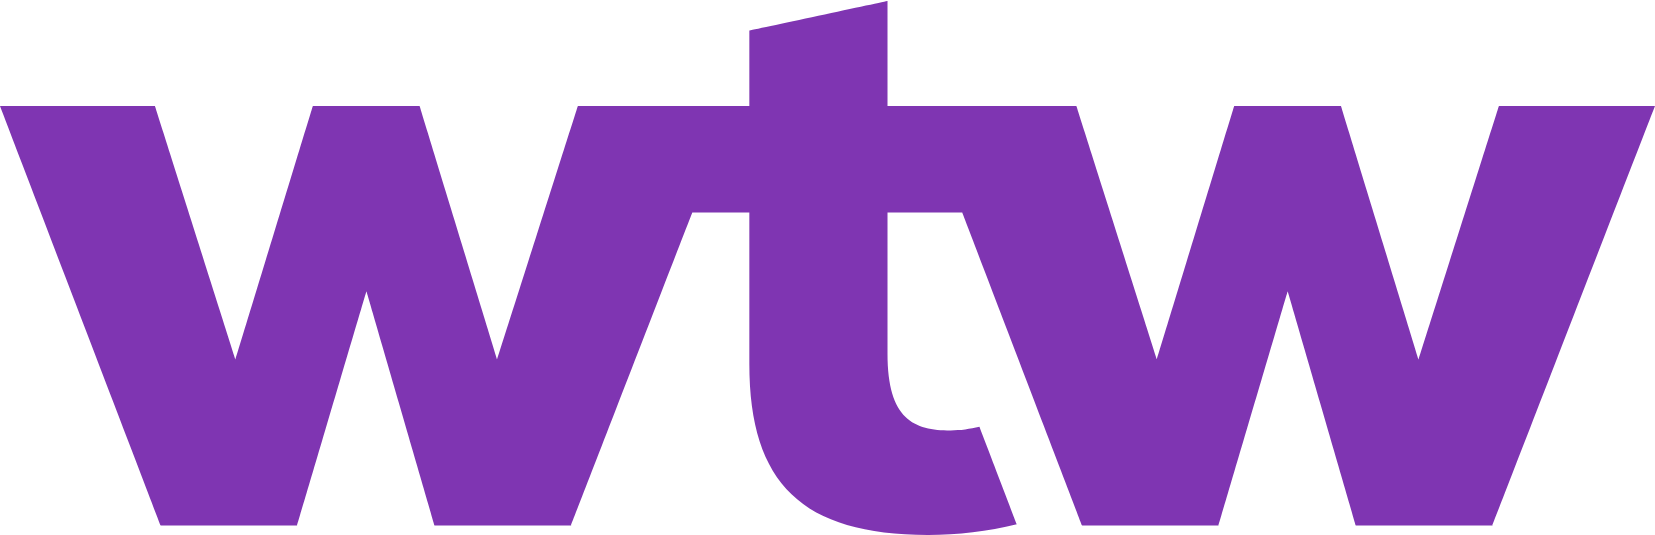 willis towers watson logo in transparent png and vectorized svg formats